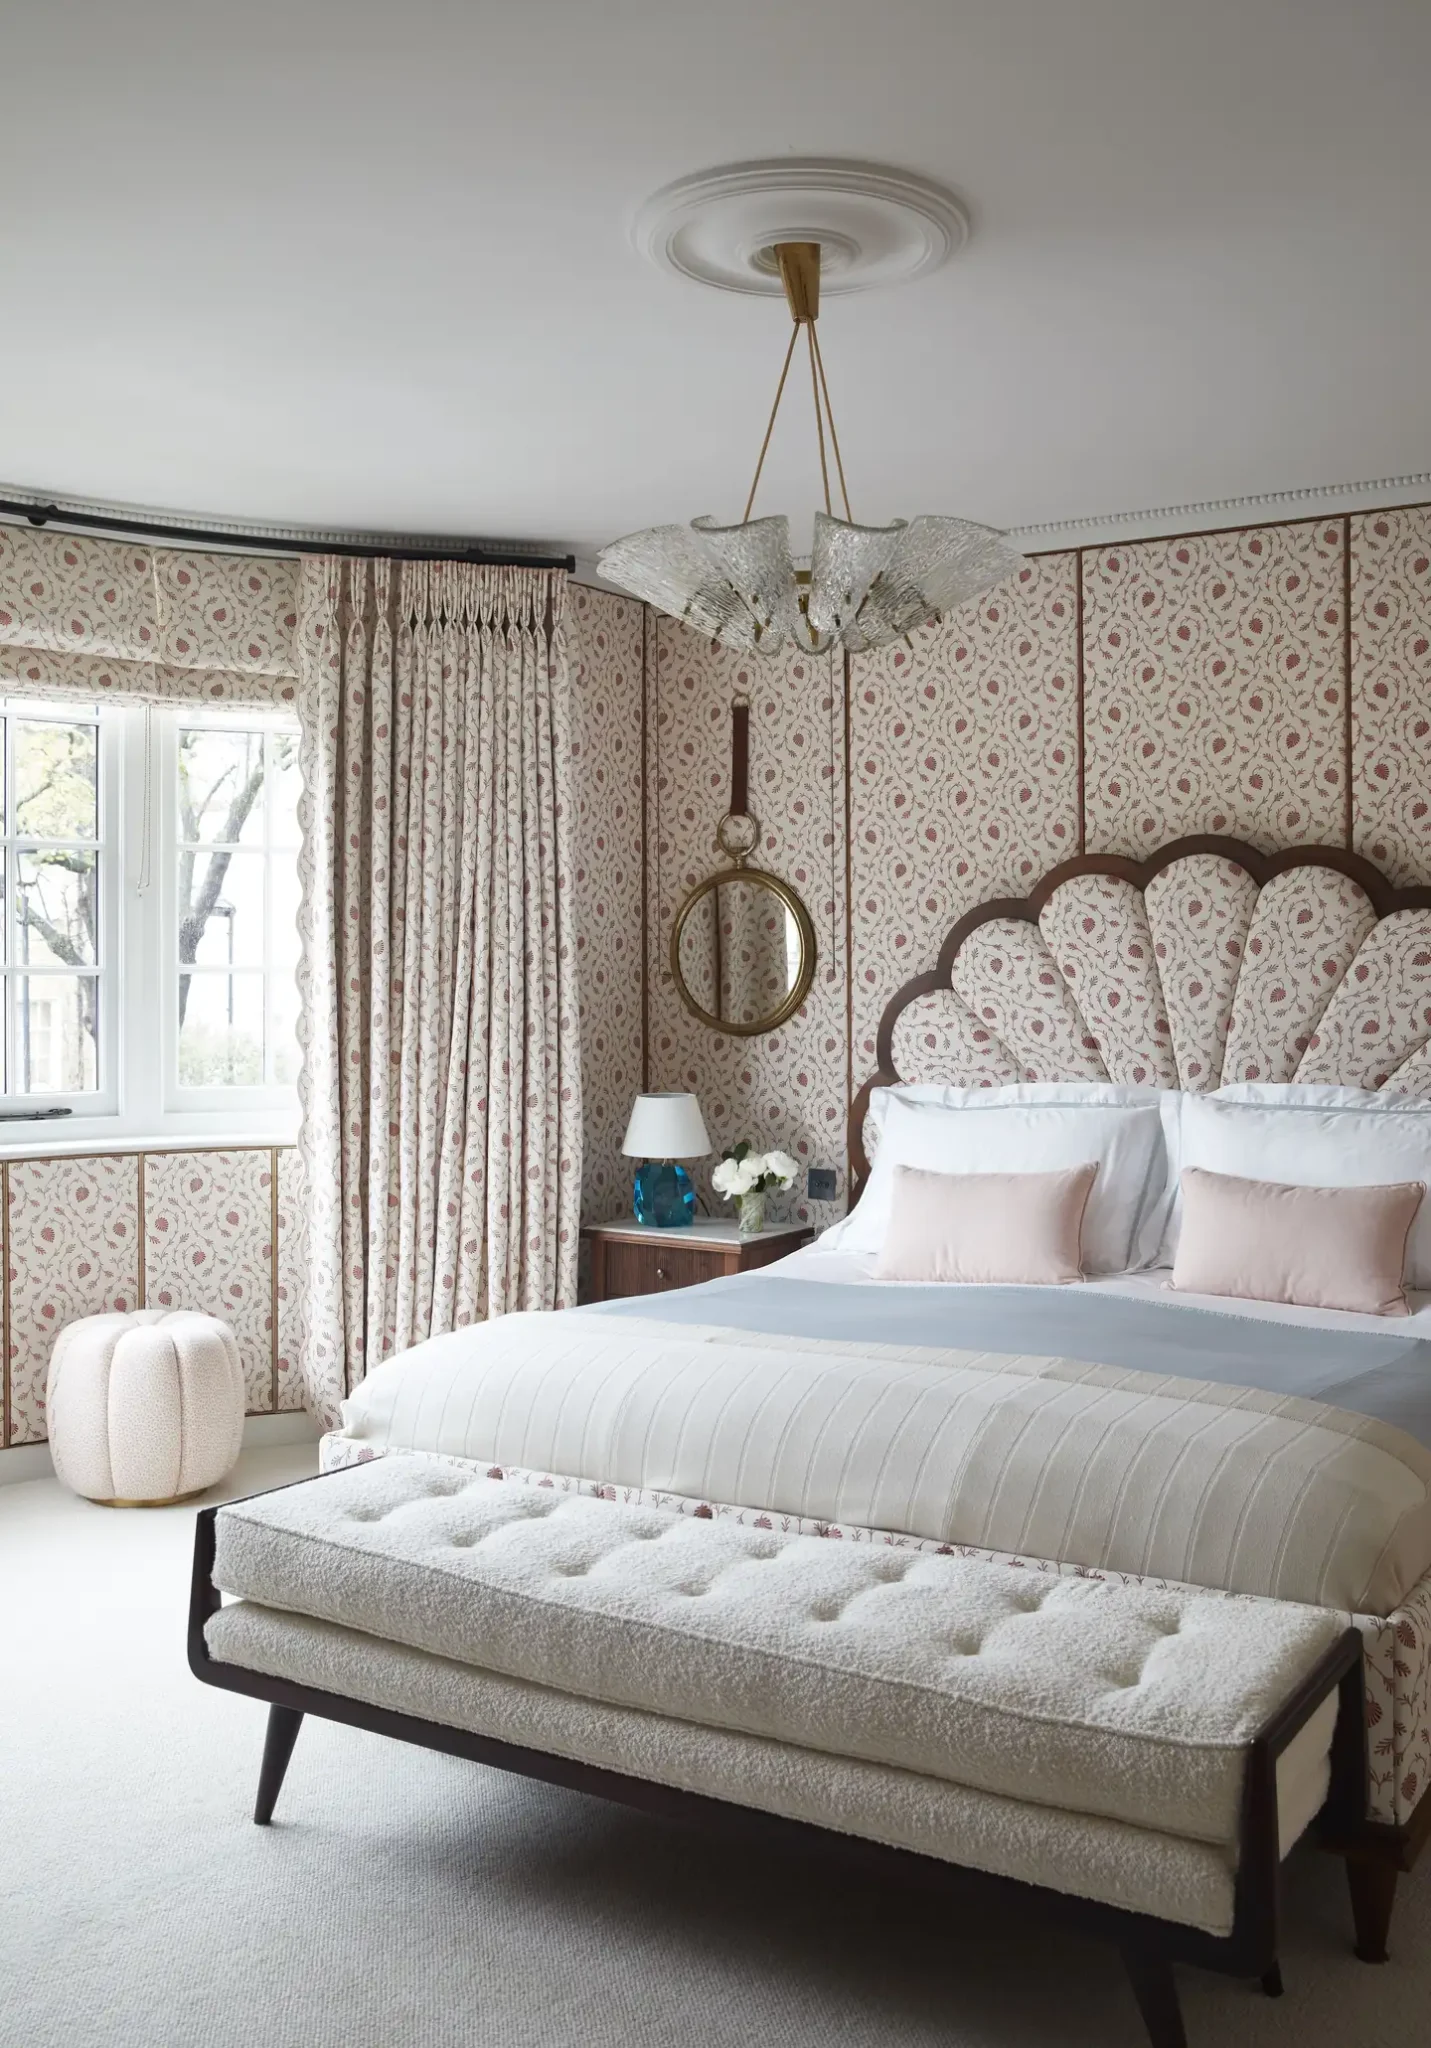 Bedroom with the same pattern on the bed's headboard, wallpaper and curtains